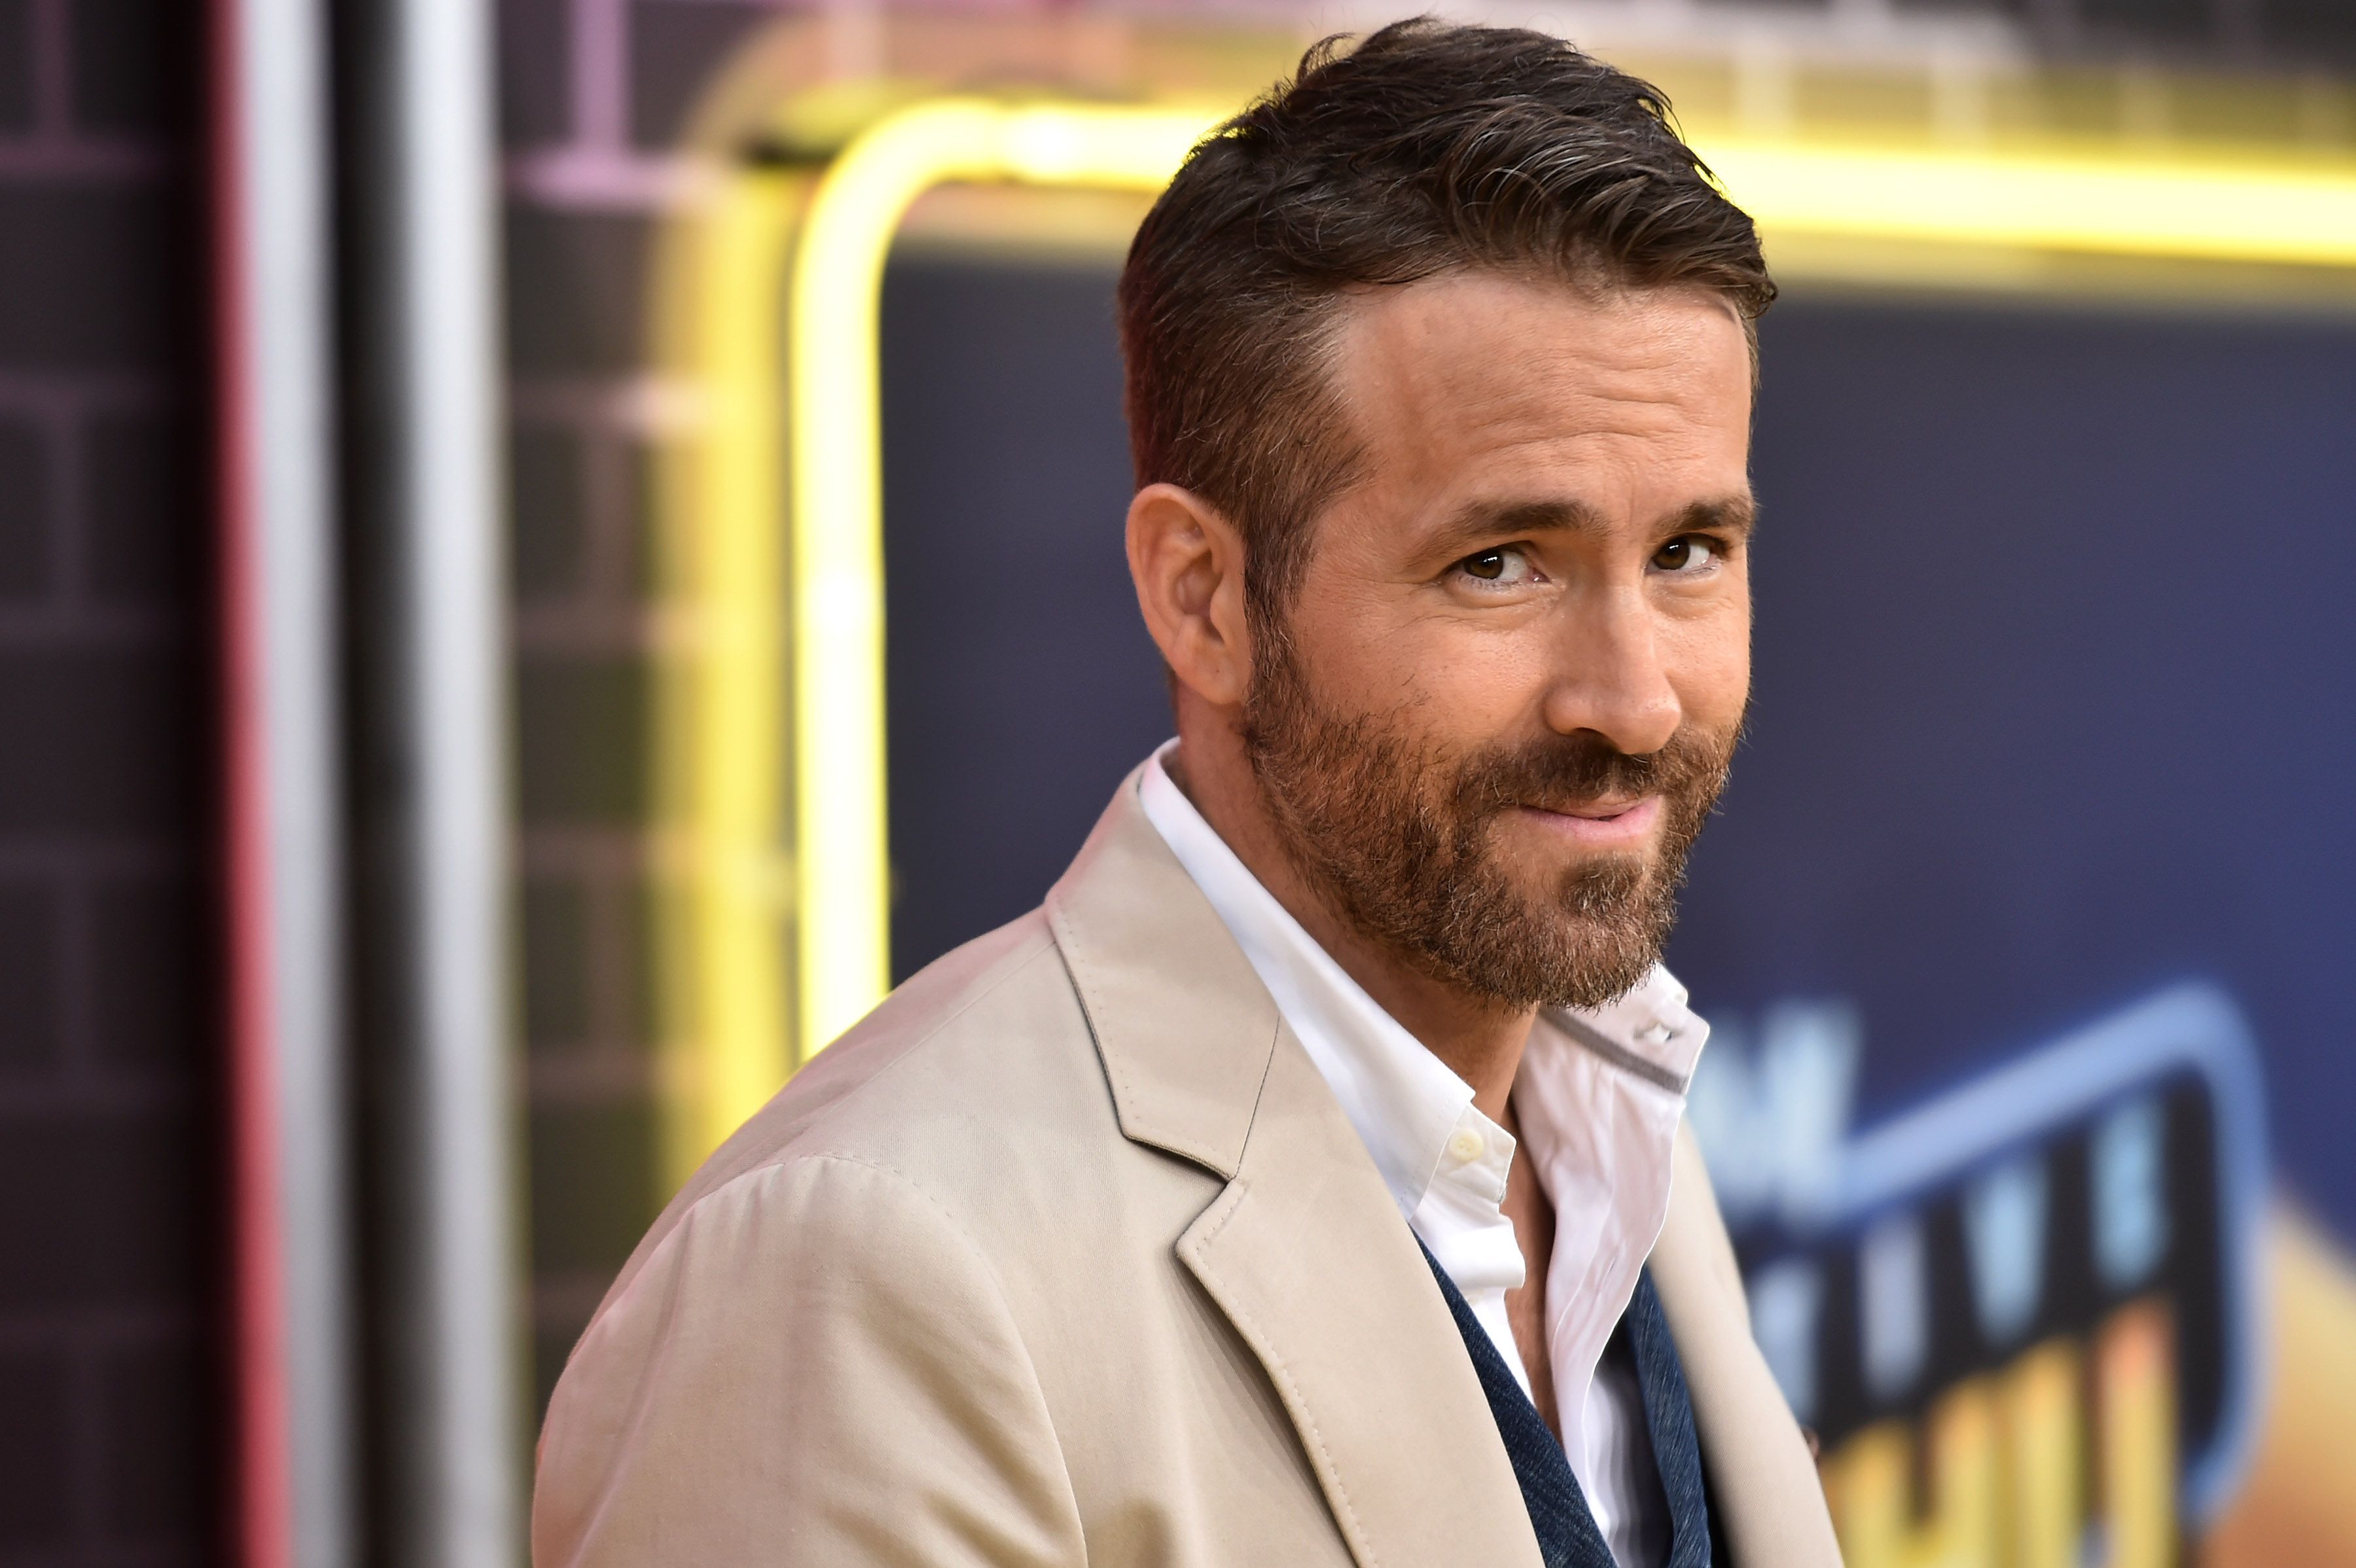 Ryan Reynolds Faked An Amazon Review For His Own Brand Aviation Gin